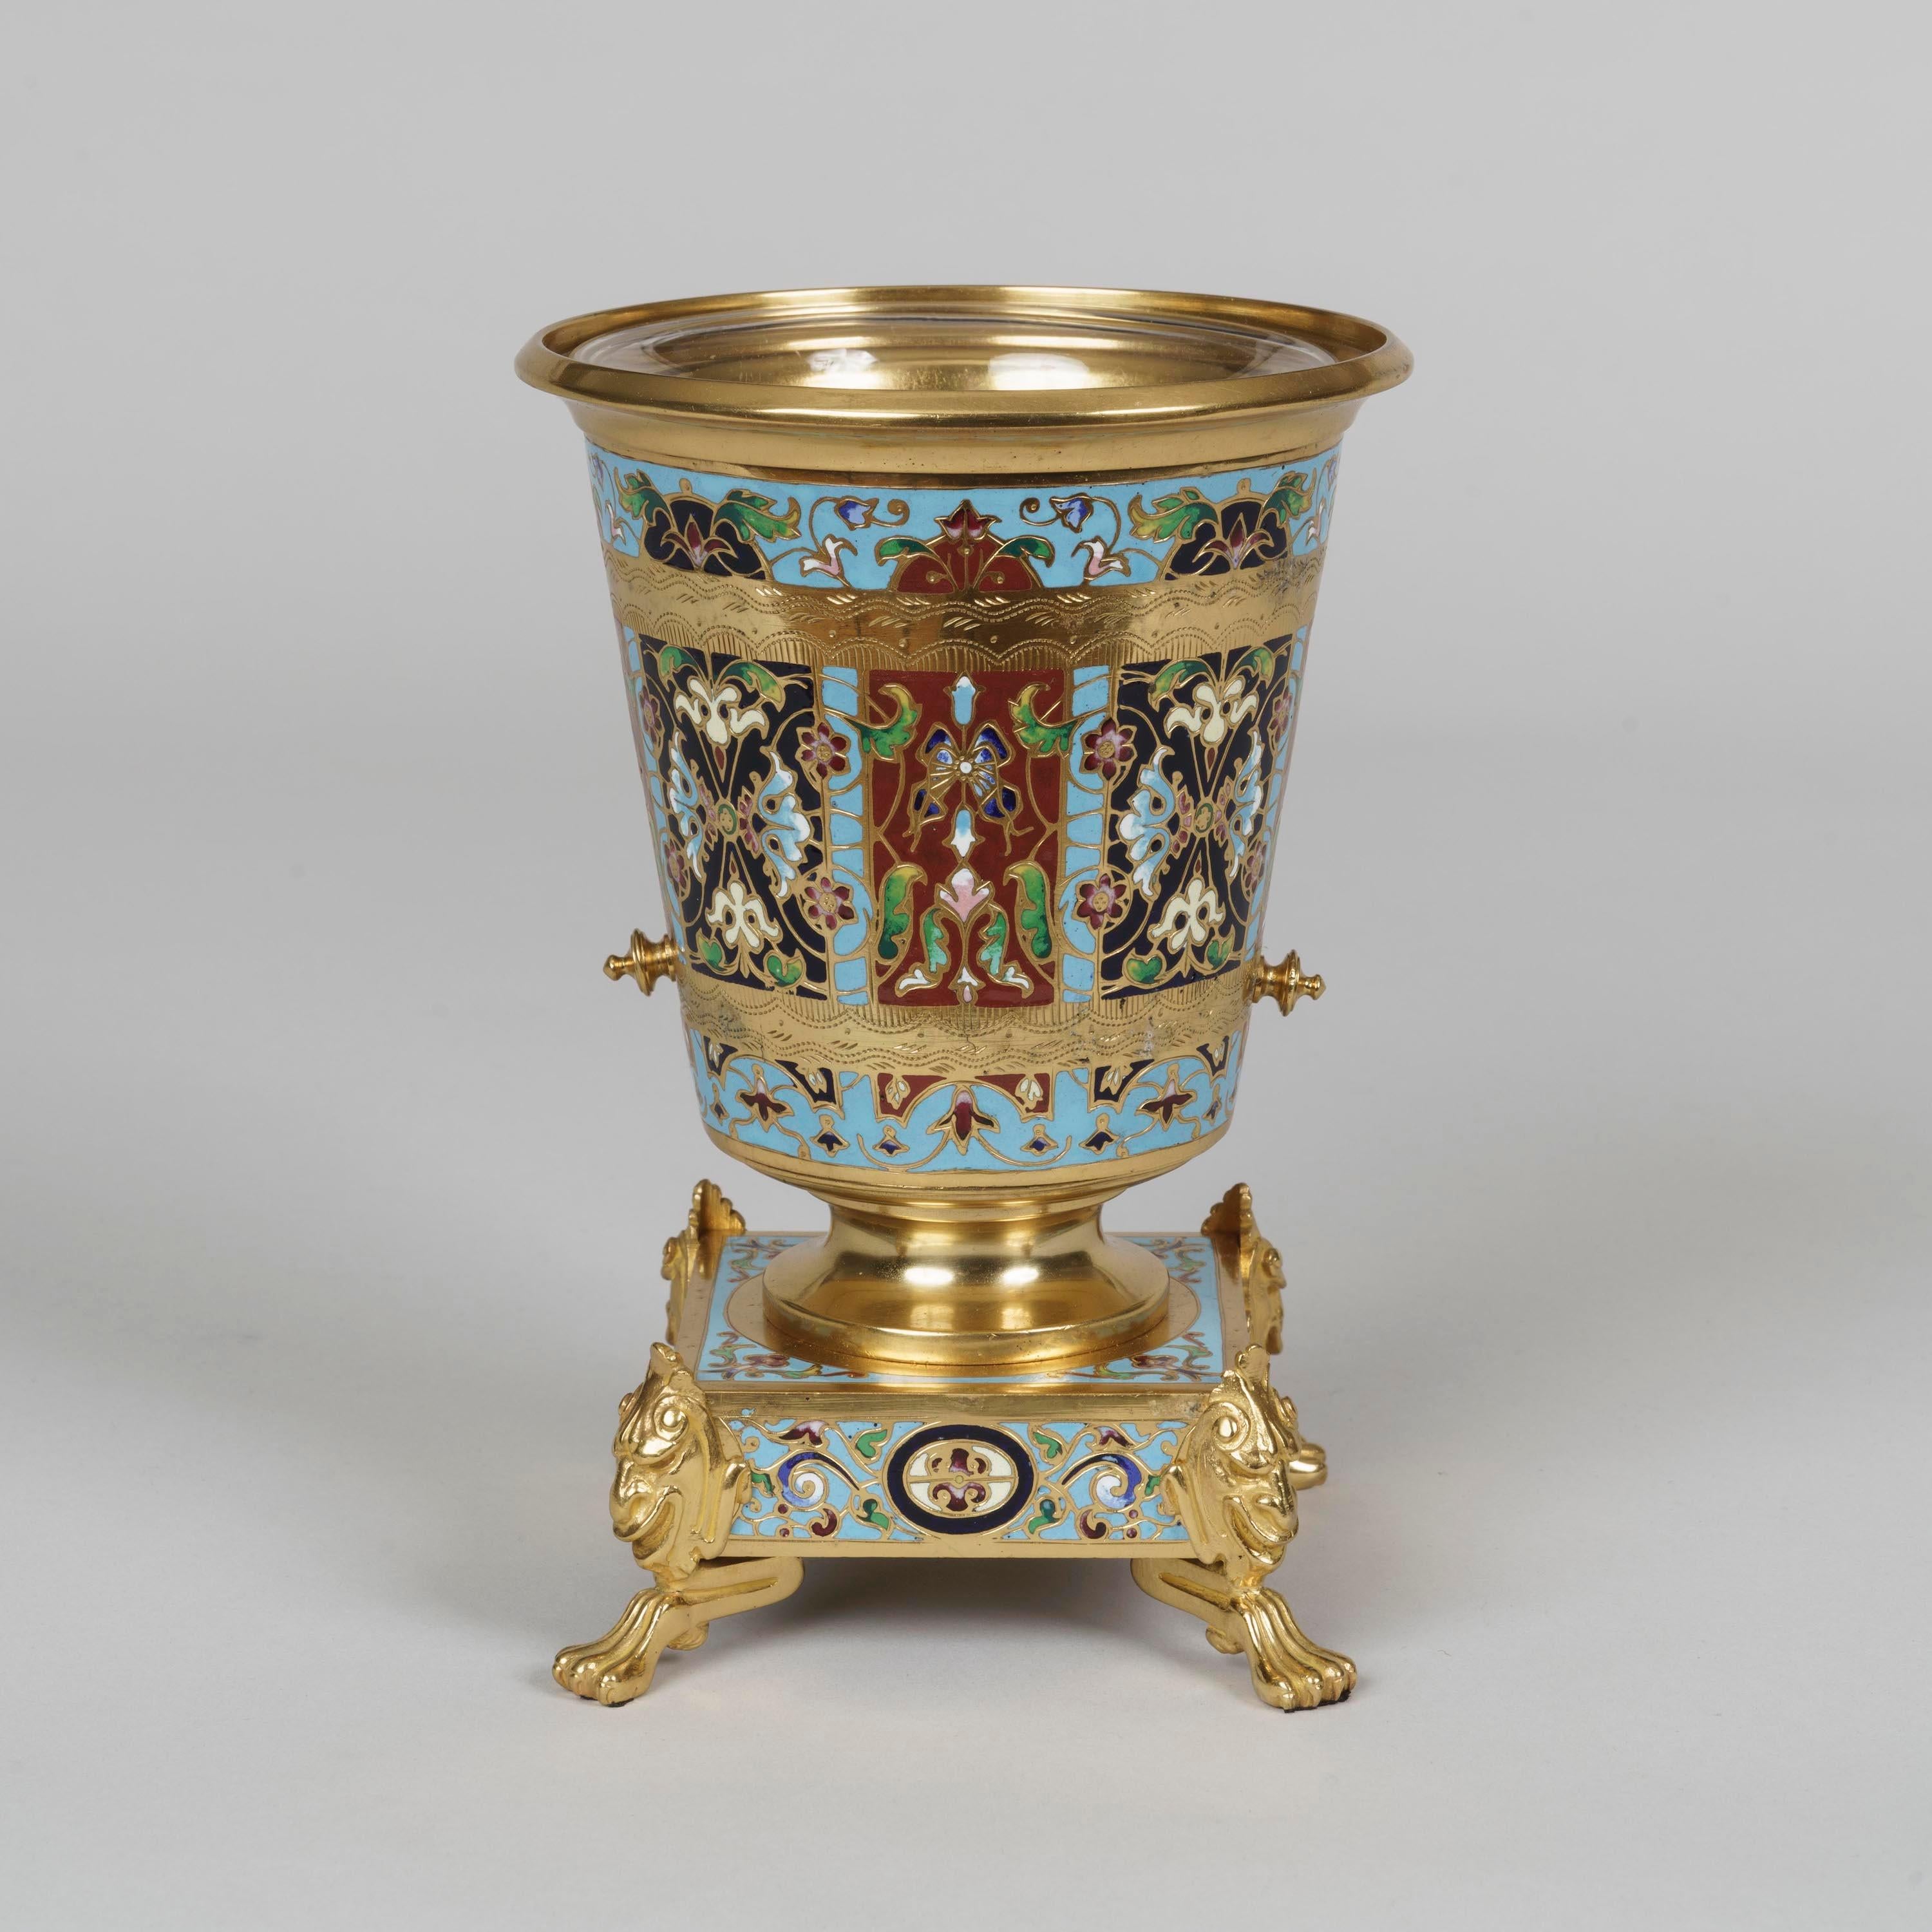 A pair of gilt bronze and champlevé enamel vases

Constructed from solid fire-gilded bronze, the miniature decorative vases supported on square plinths rising from paw feet, the conical bodies having several registers of engraved ornament